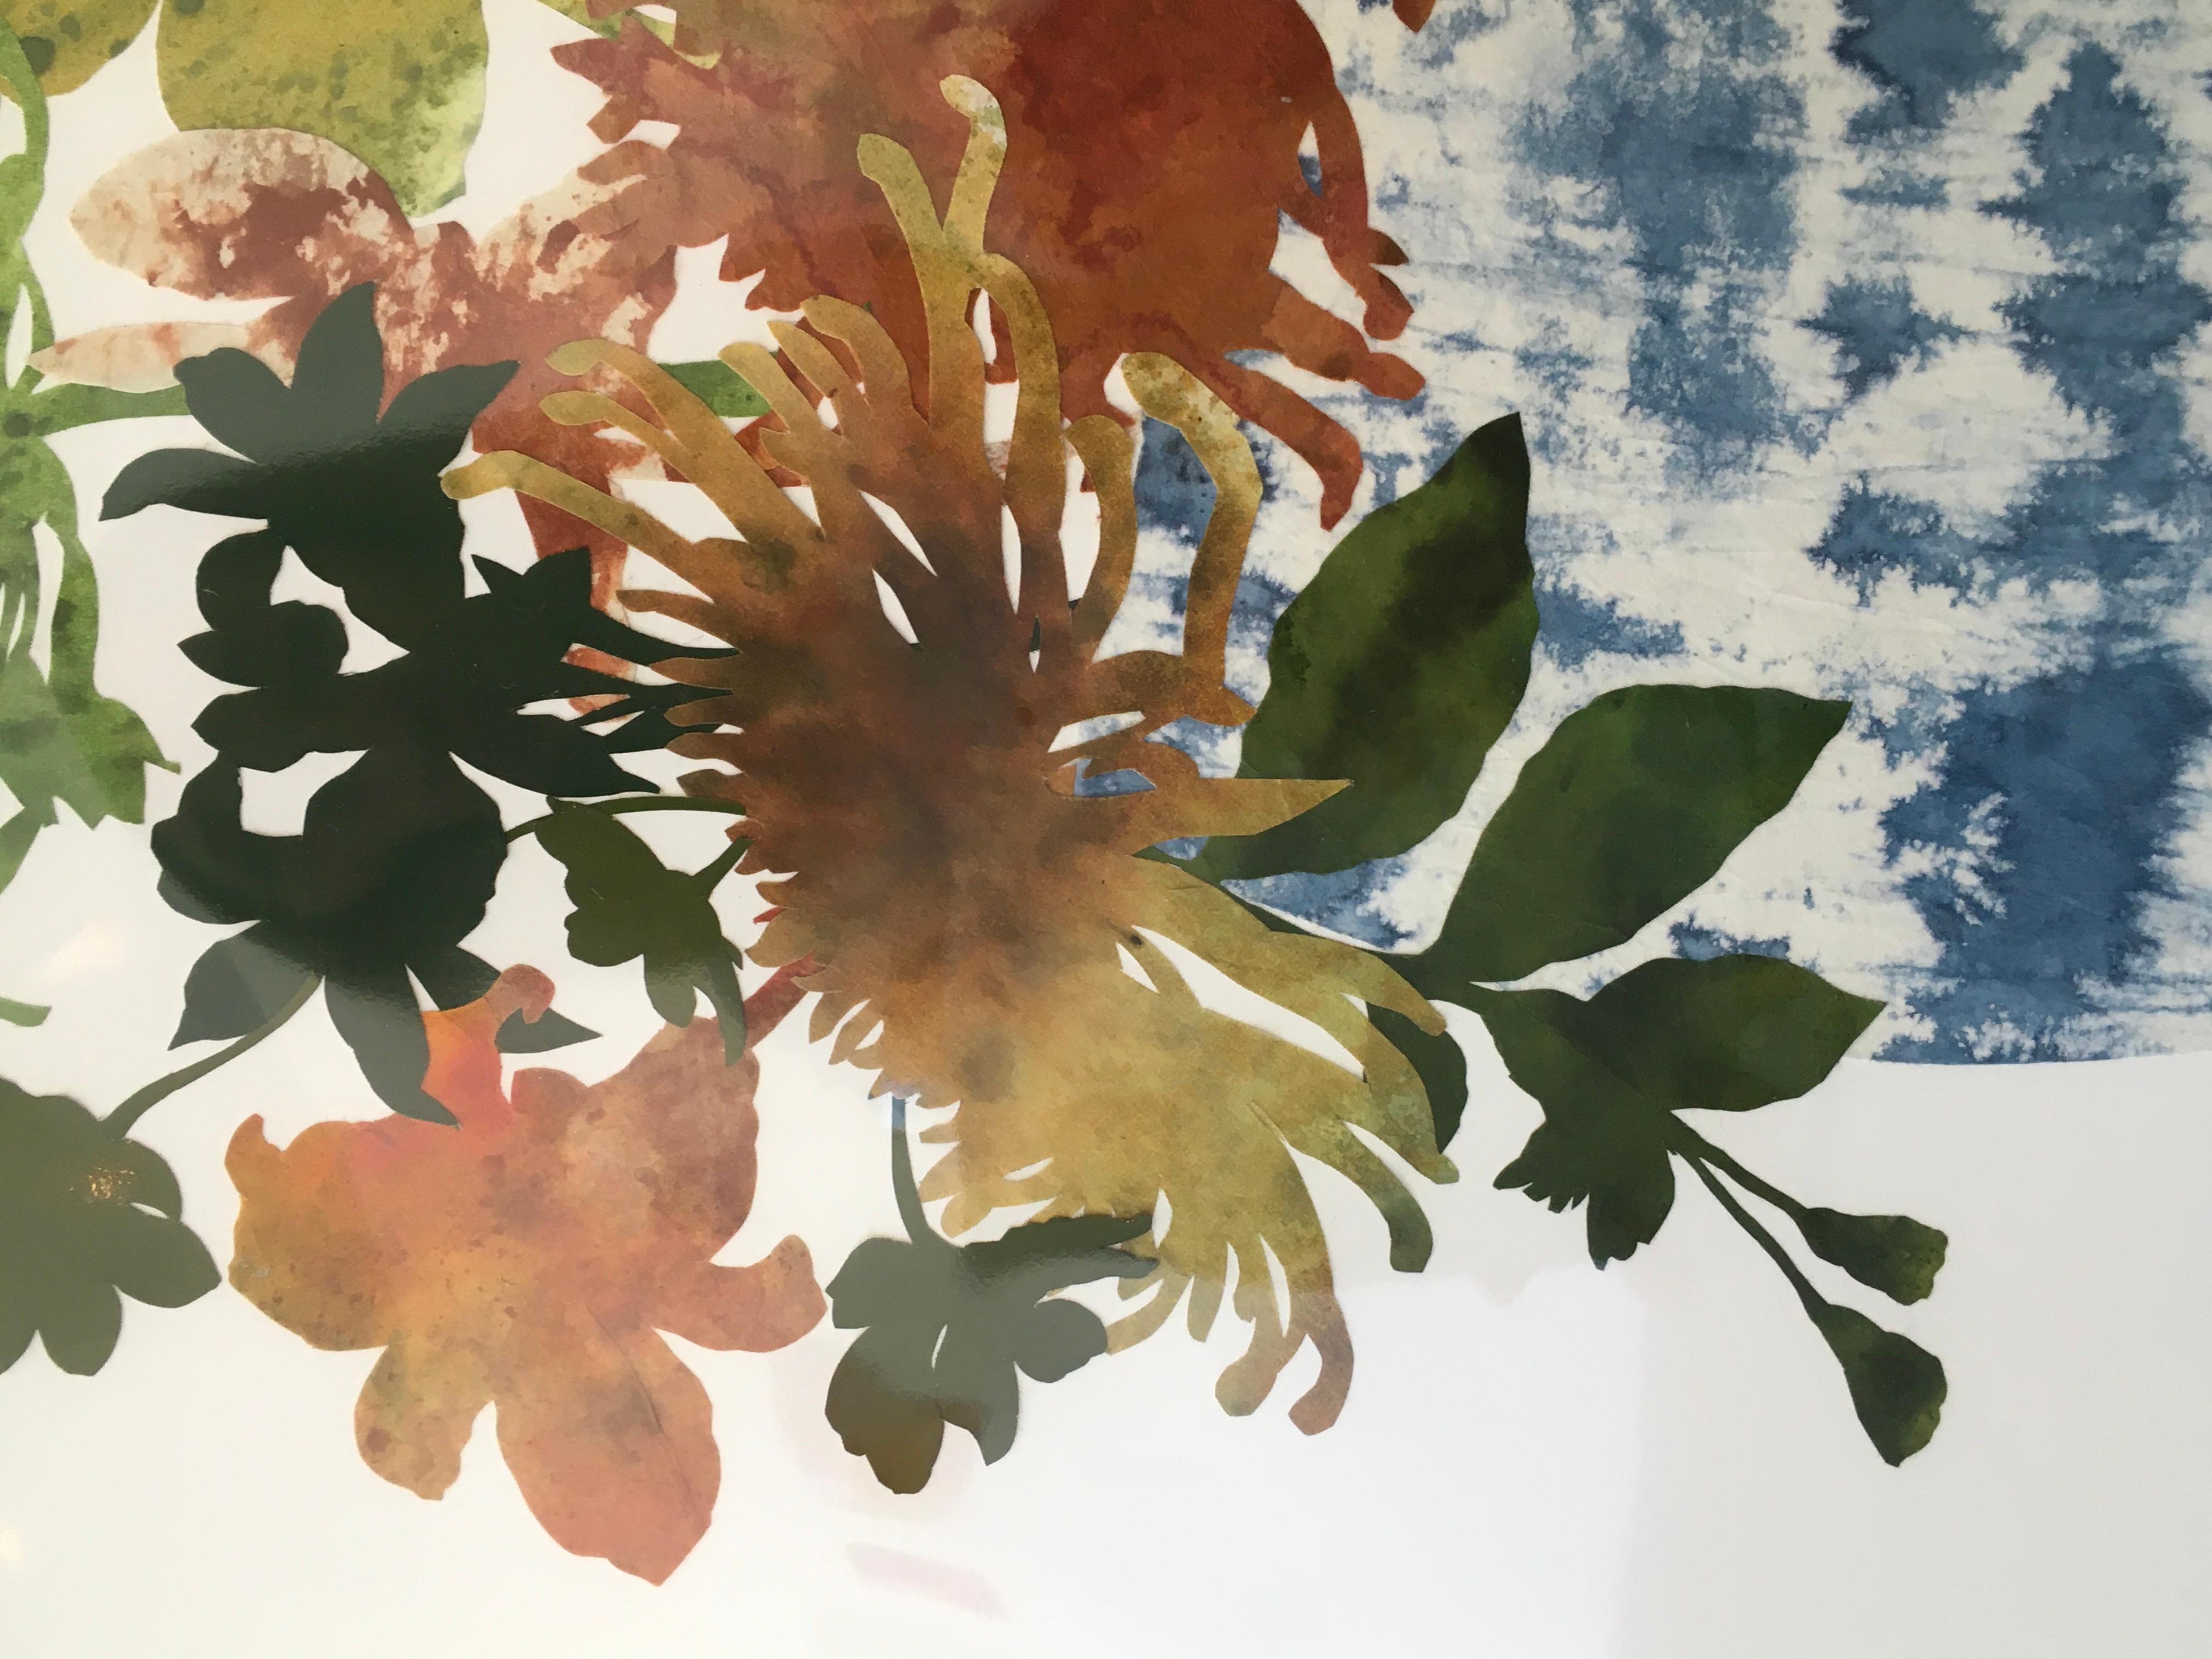 Daylight Blooms No. 25 is a botanical collage artwork created with Hand Cut dyed paper by Deborah Weiss.  The artwork is 30x22.  It is unframed.    It is a one of a kind floral artwork.  Everylasting flowers and a wonderful gift.

This is part of